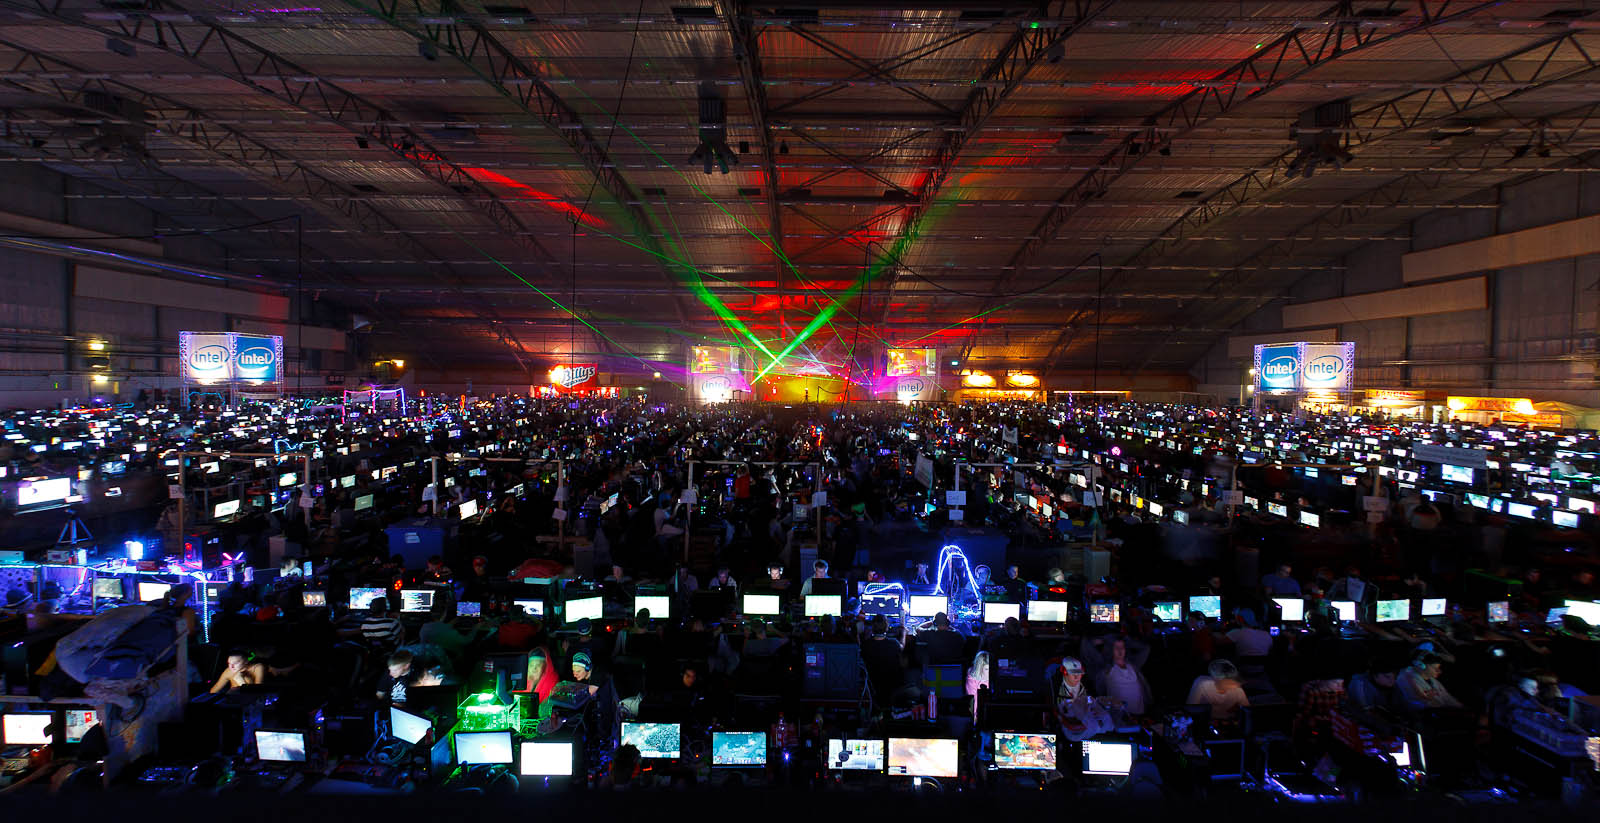 Hall D on the second night, 12,280 computers.jpg